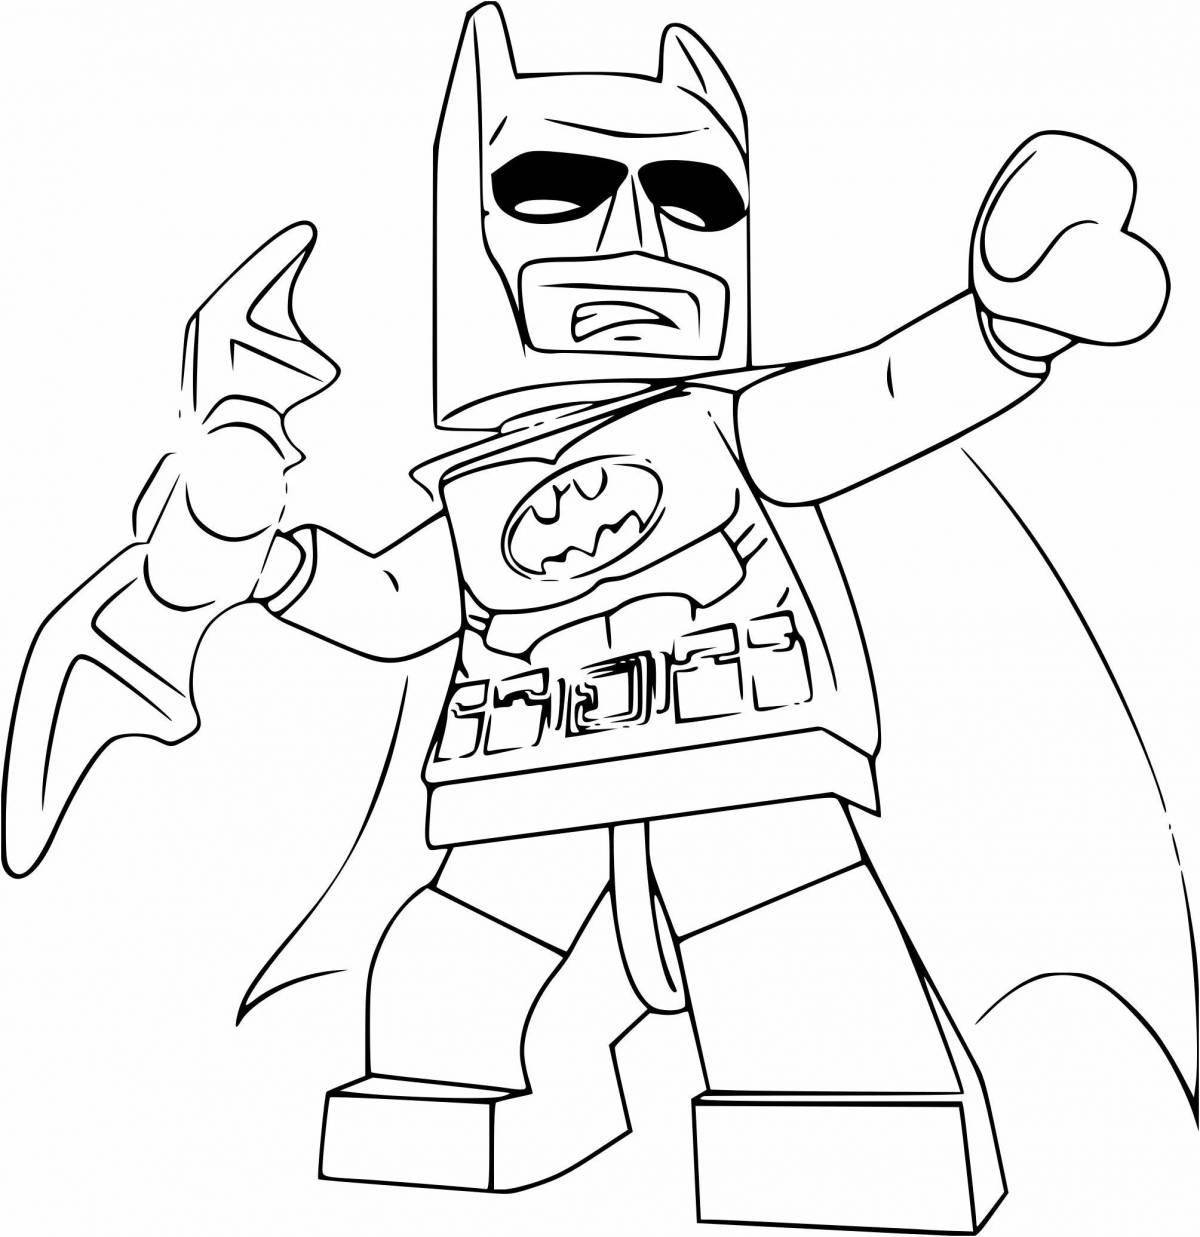 Lego great heroes coloring book